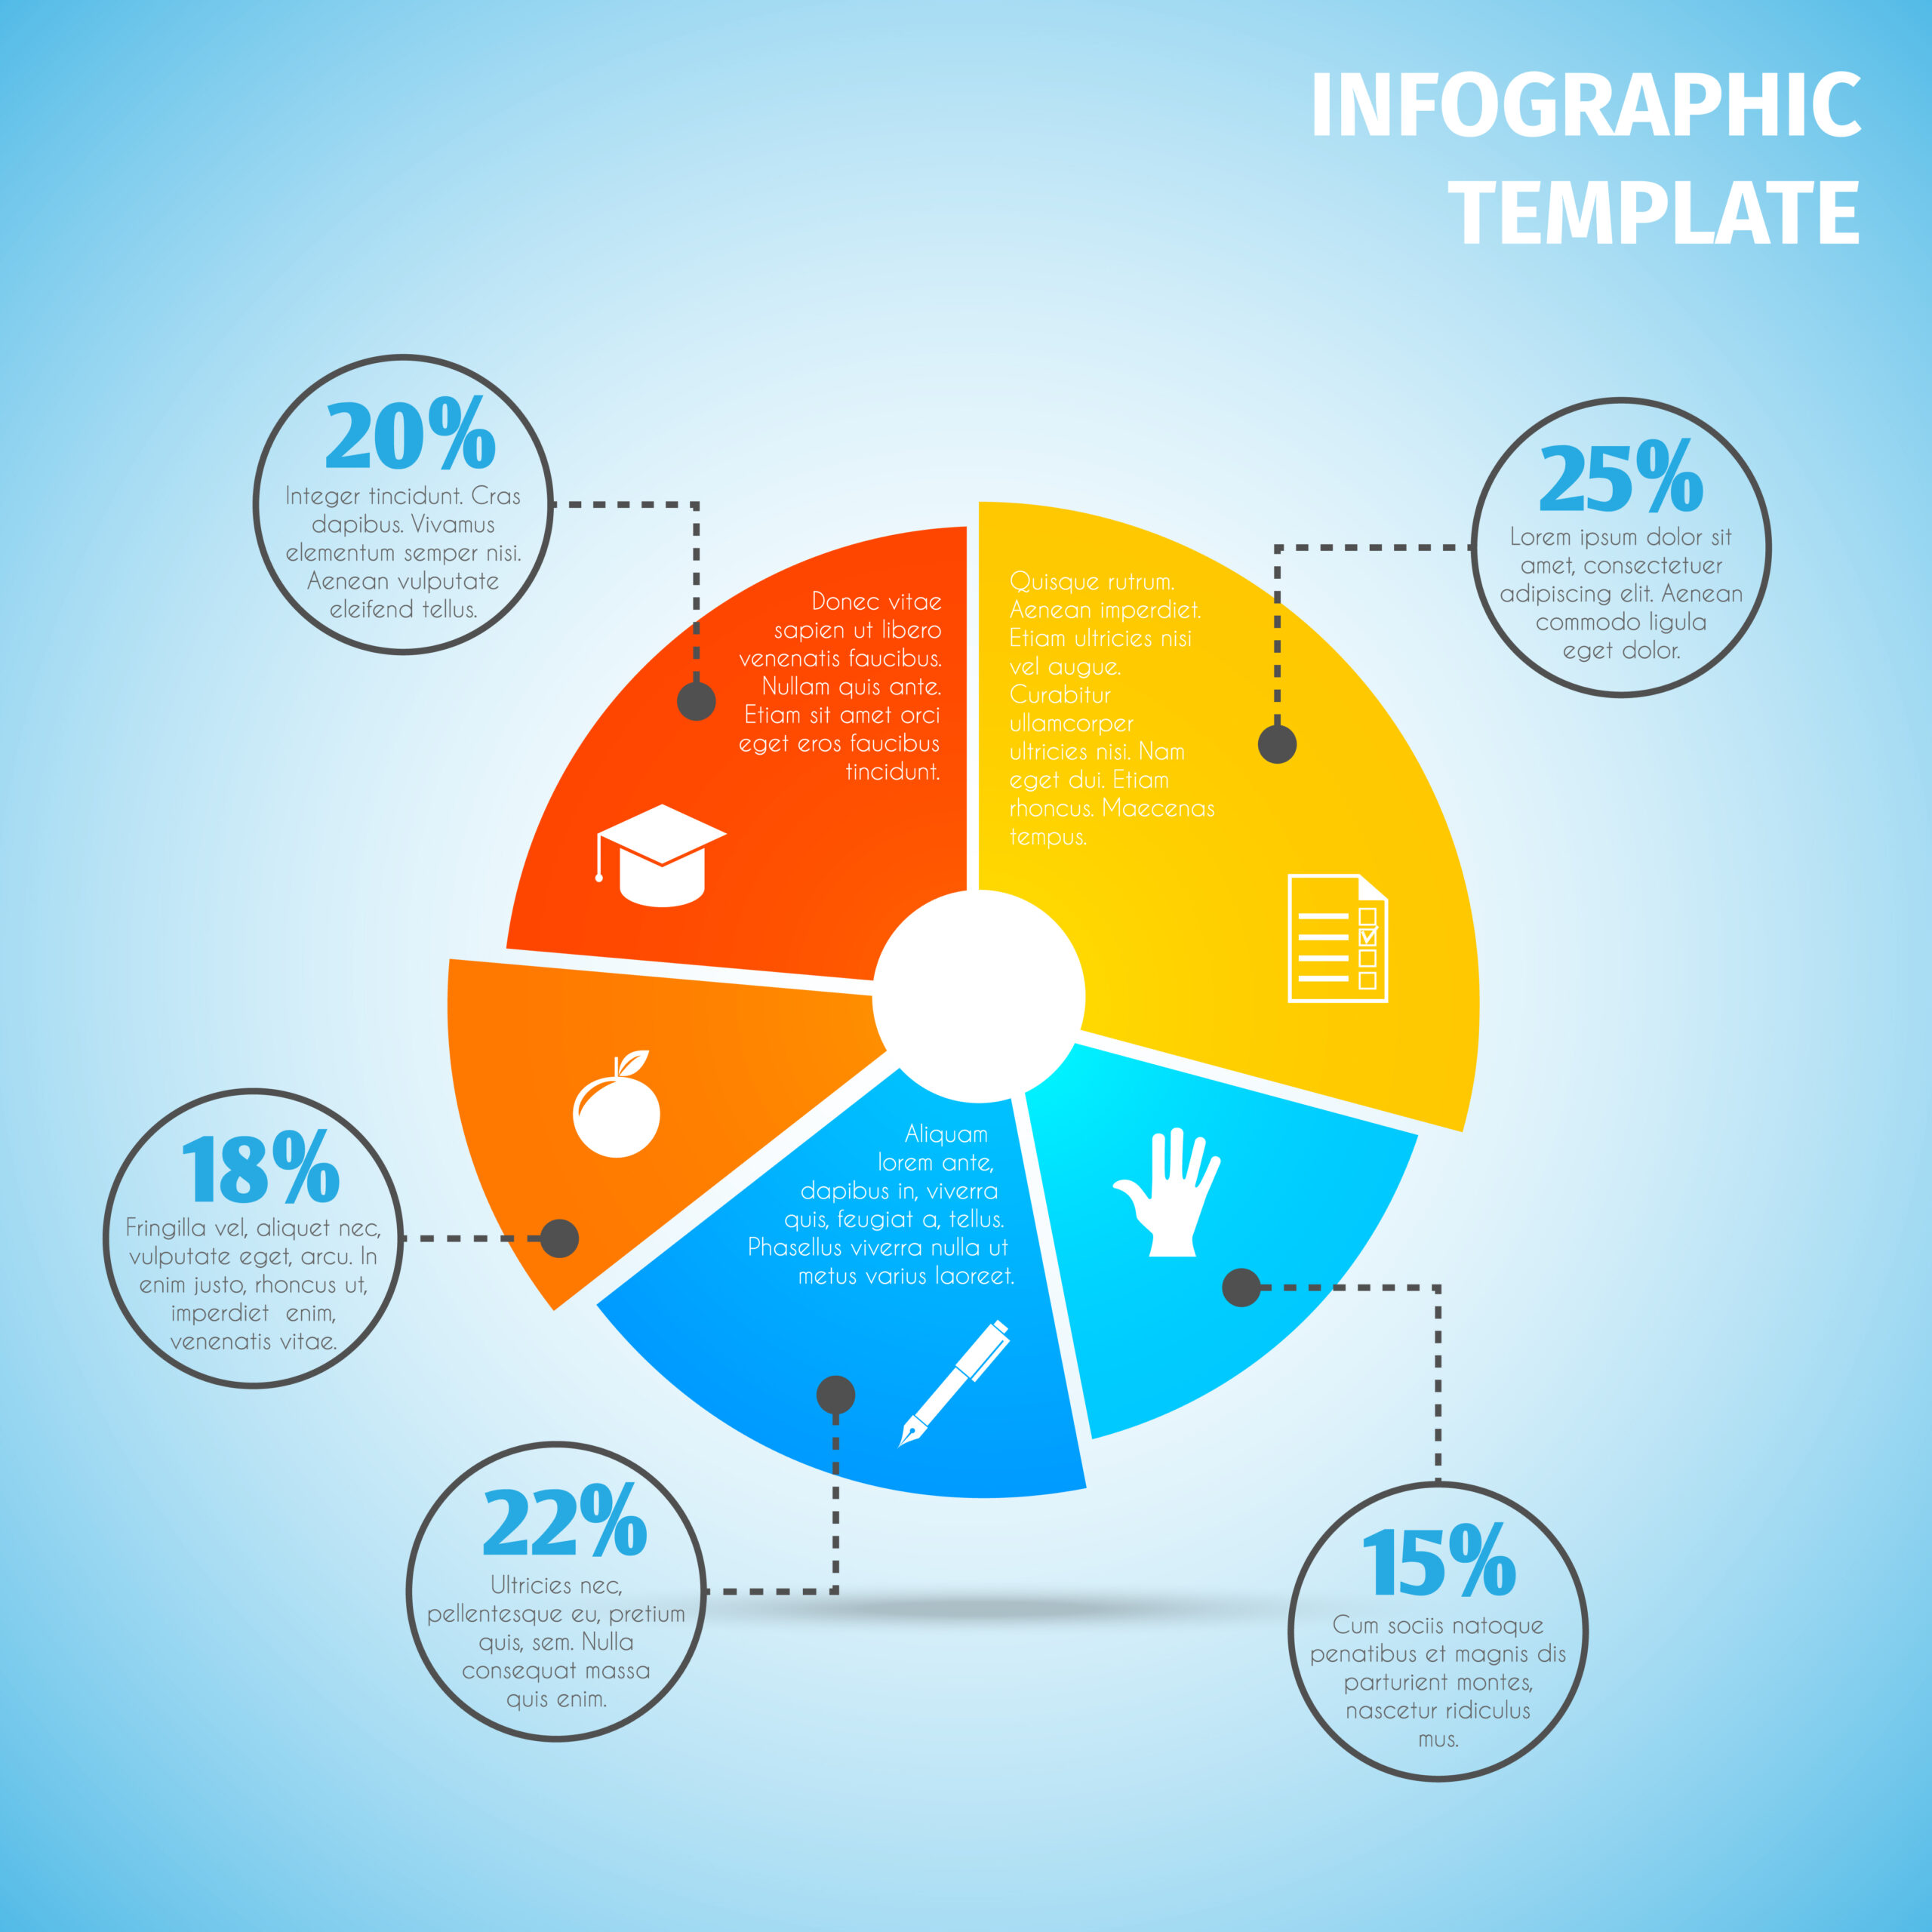 Human Infographic template layout with statistical graphs and elements. Royalty-Free Stock Image ...